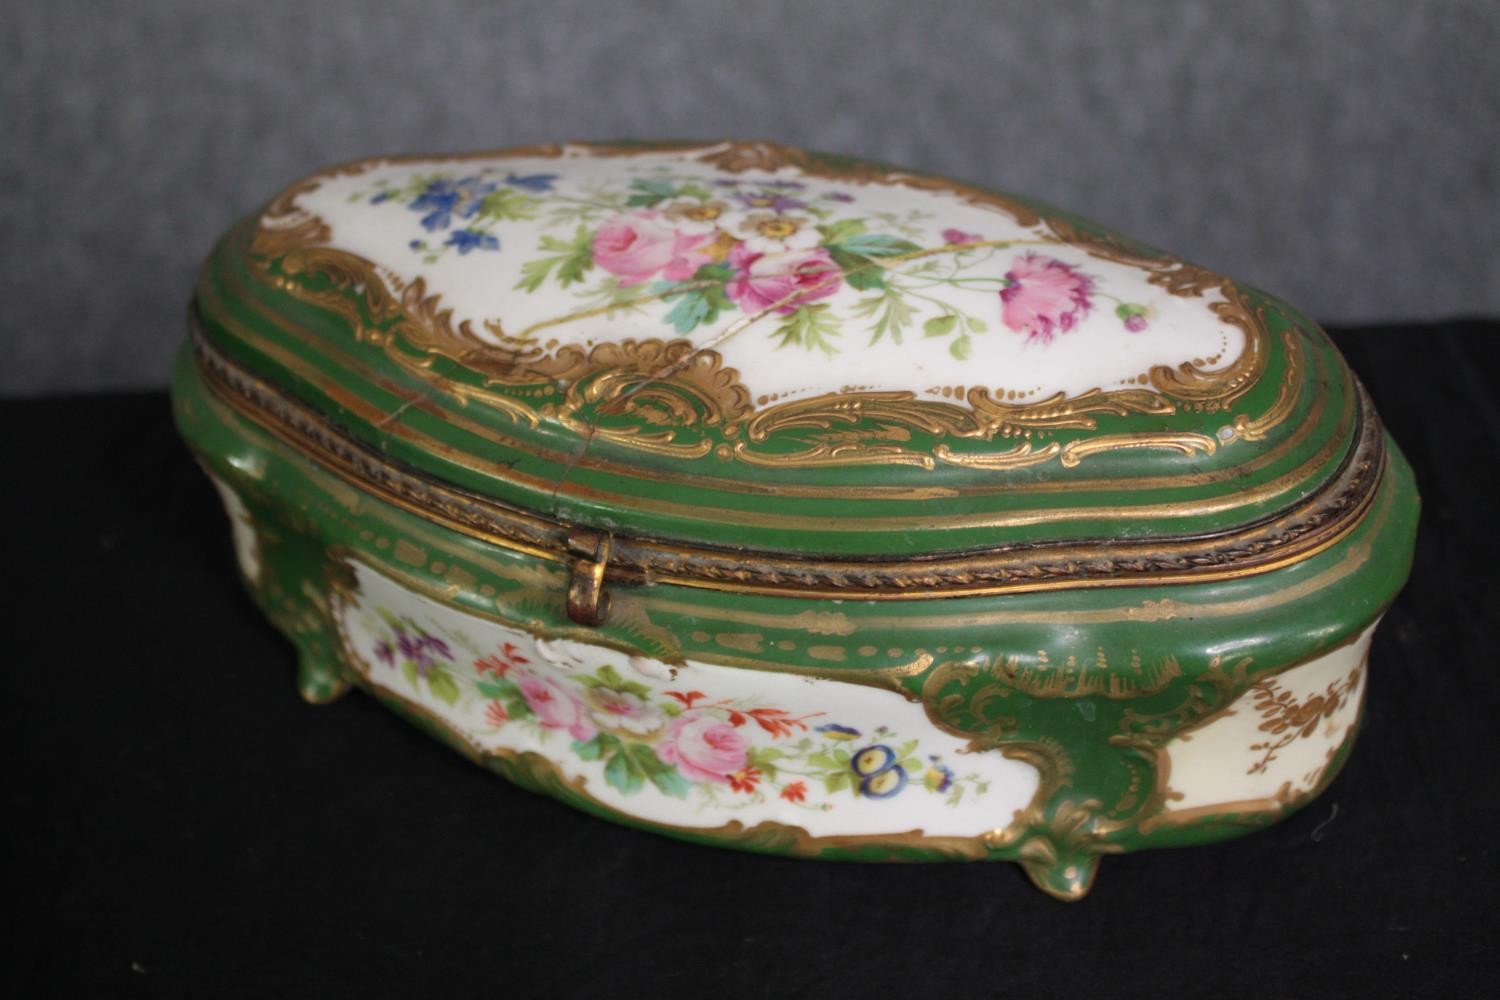 A mixed collection. A Yardley soap dish with porcelain figures and lidded glass bottle, decorative - Image 8 of 10